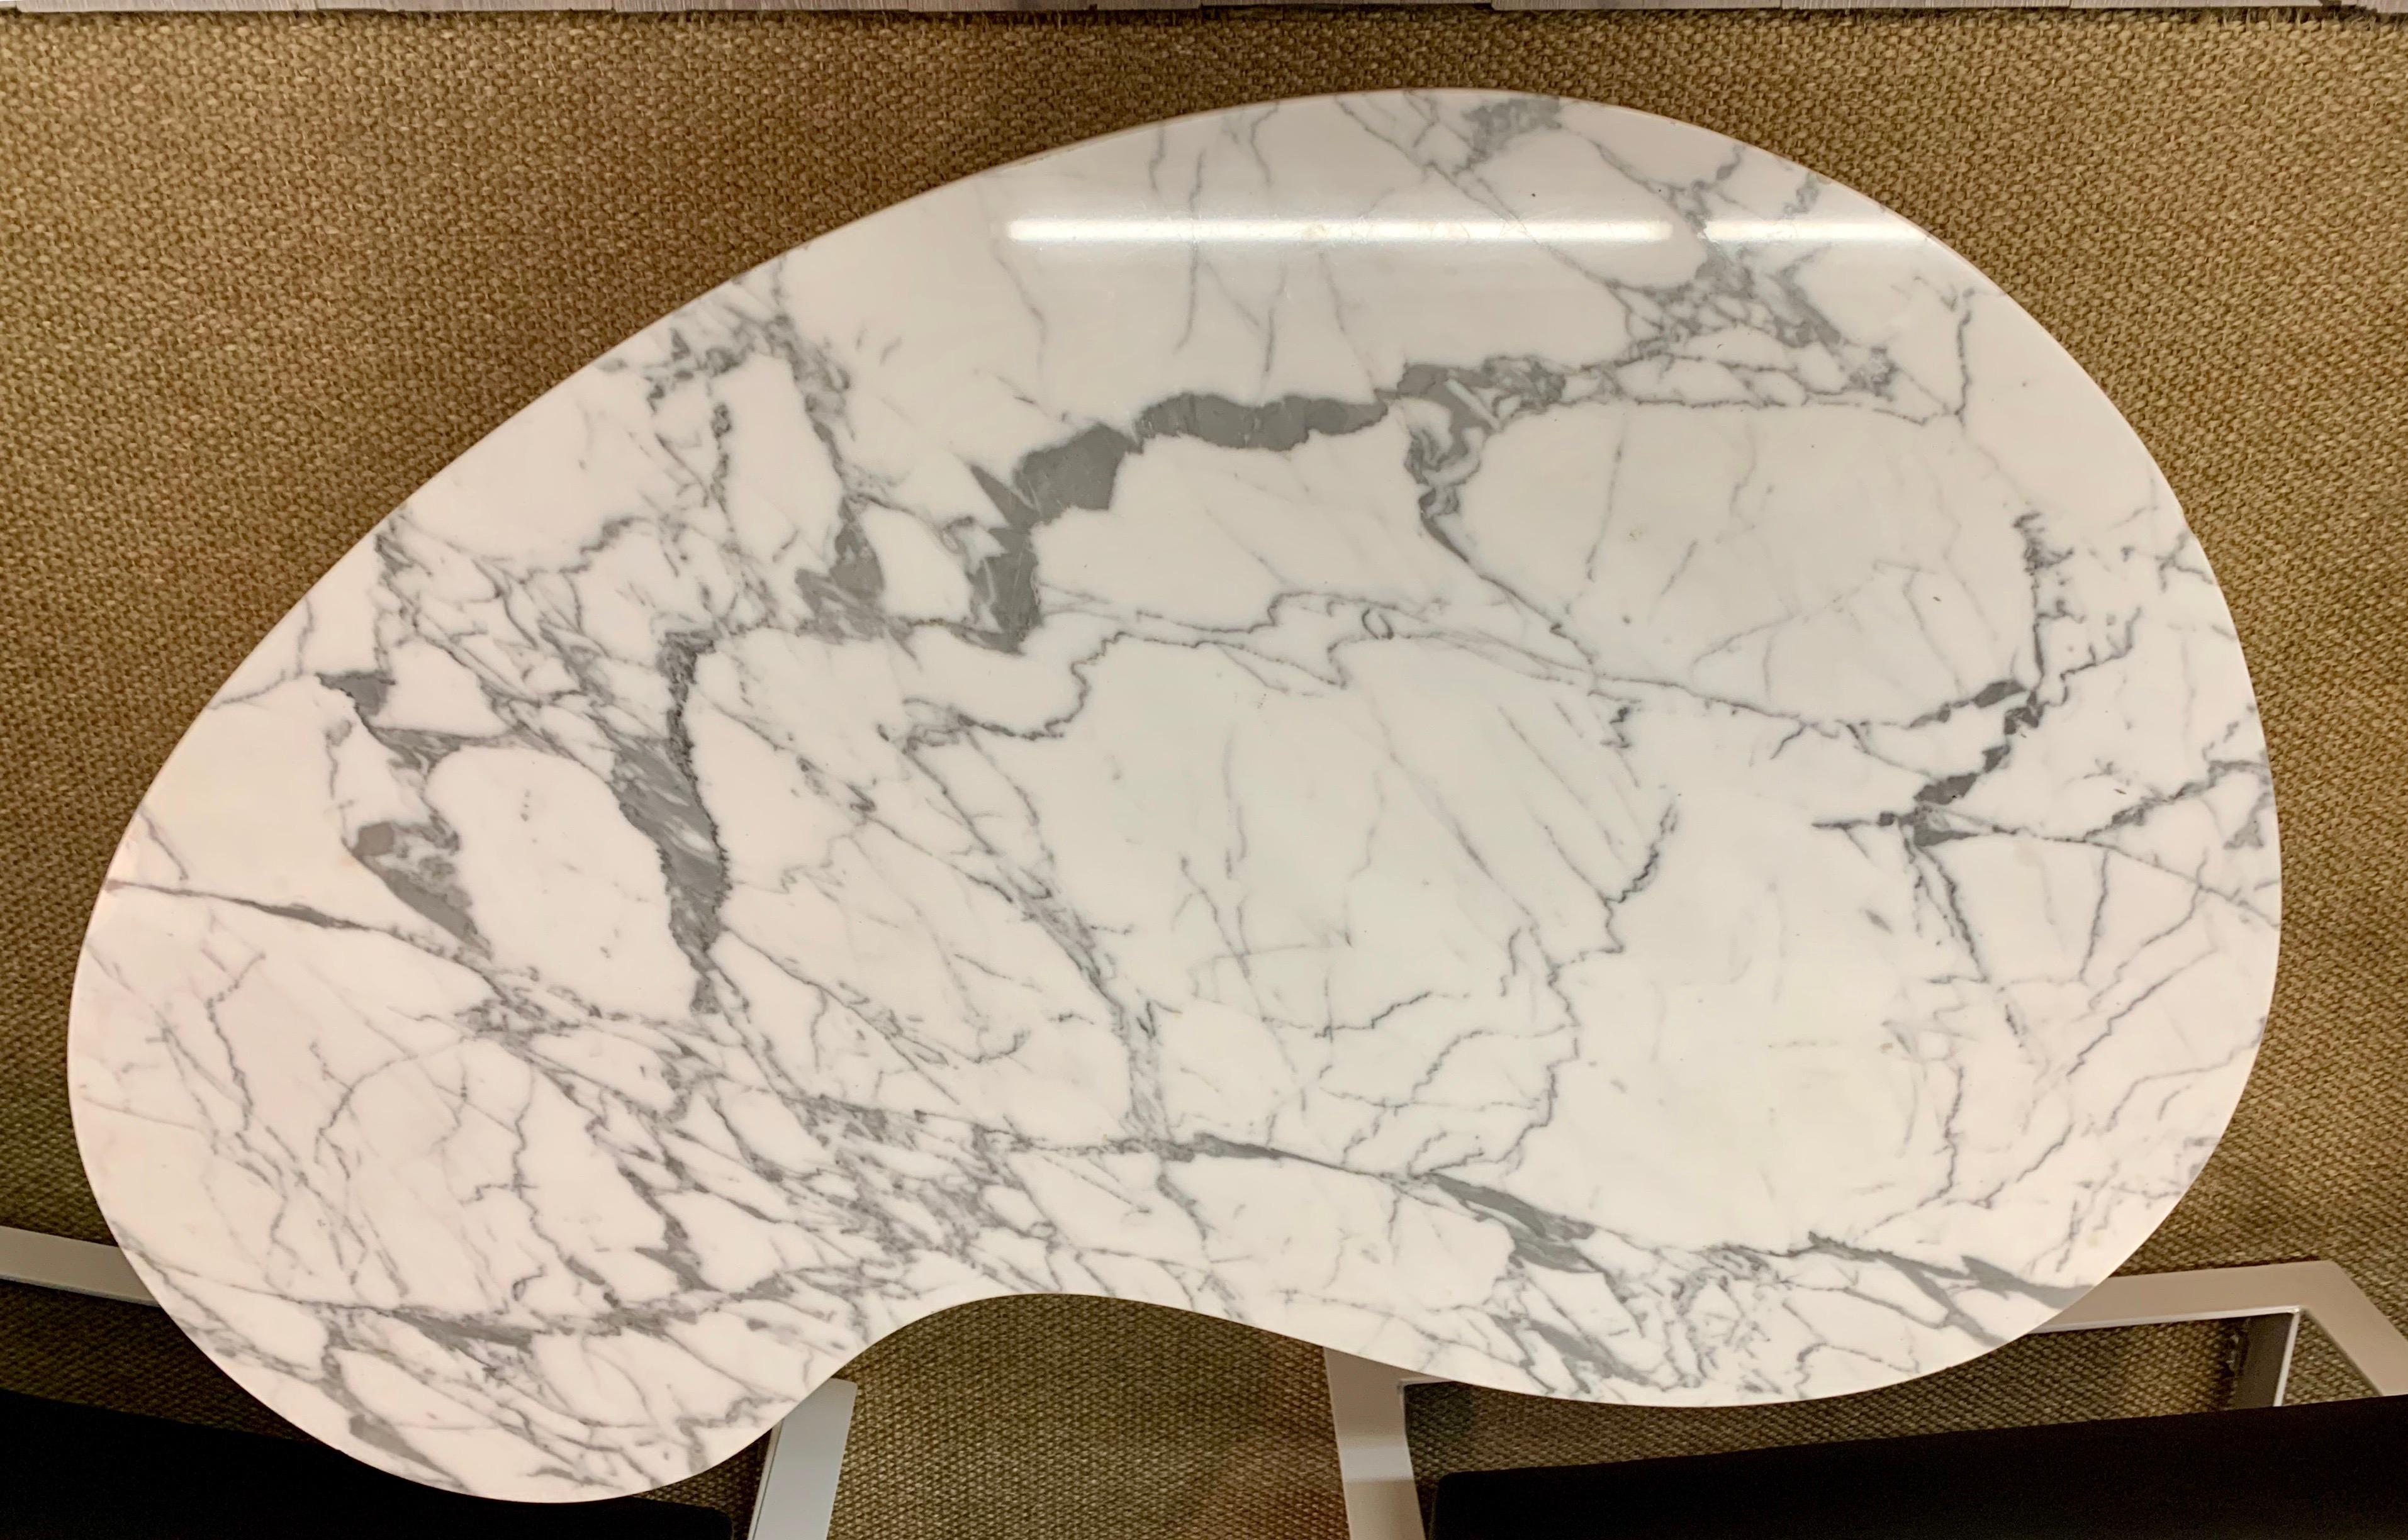 marble kidney shaped coffee table